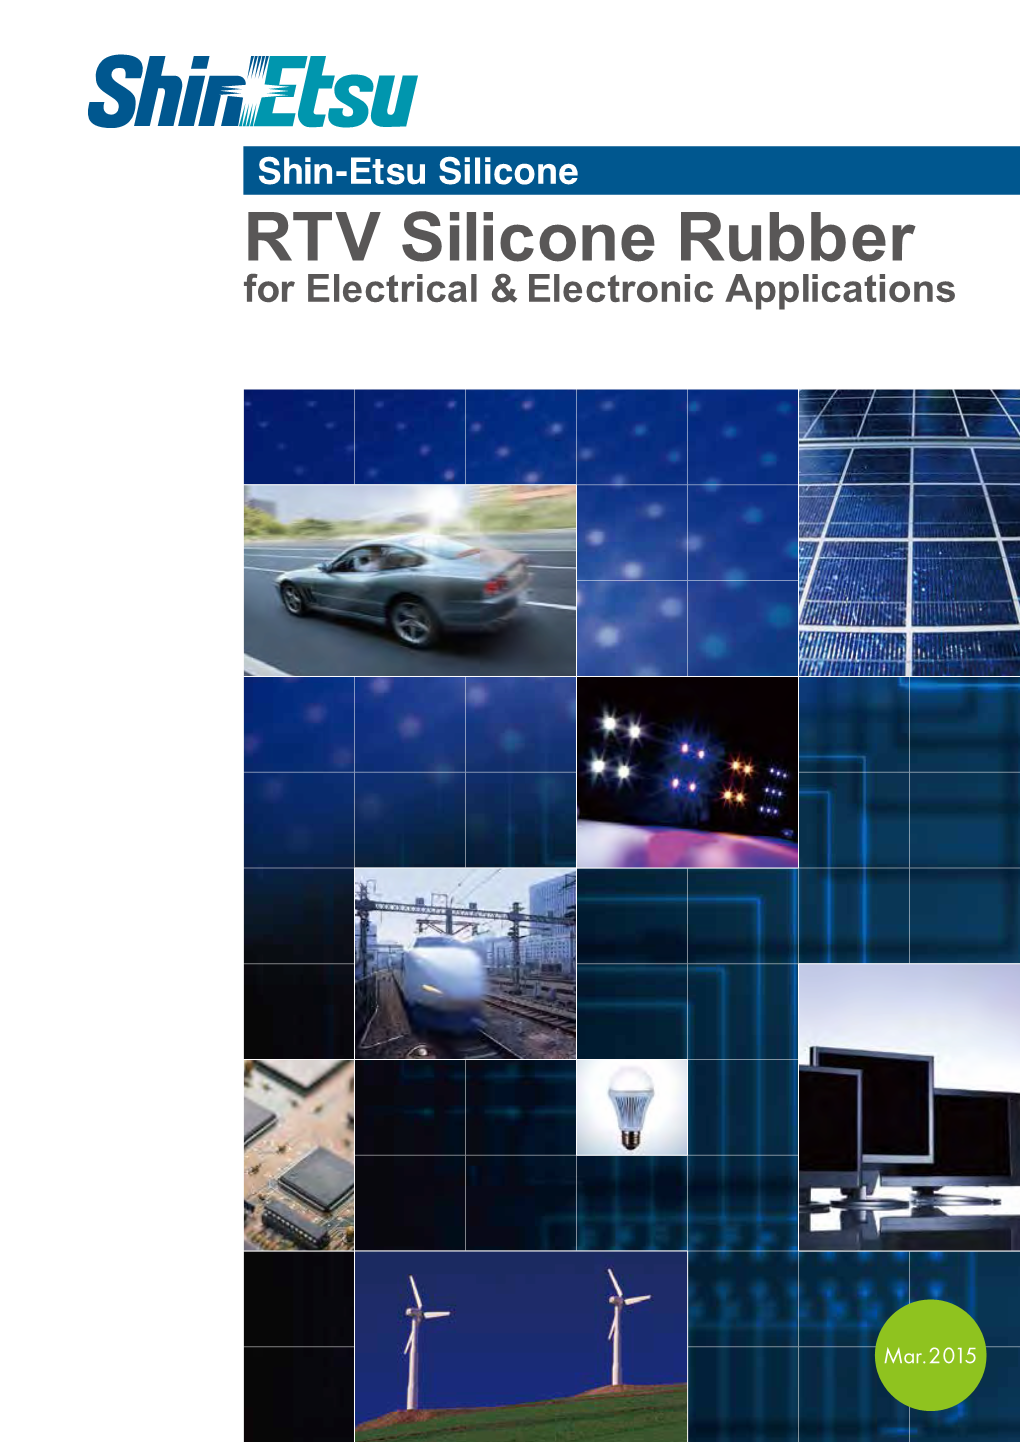 RTV Silicone Rubber for Electrical & Electronic Applications